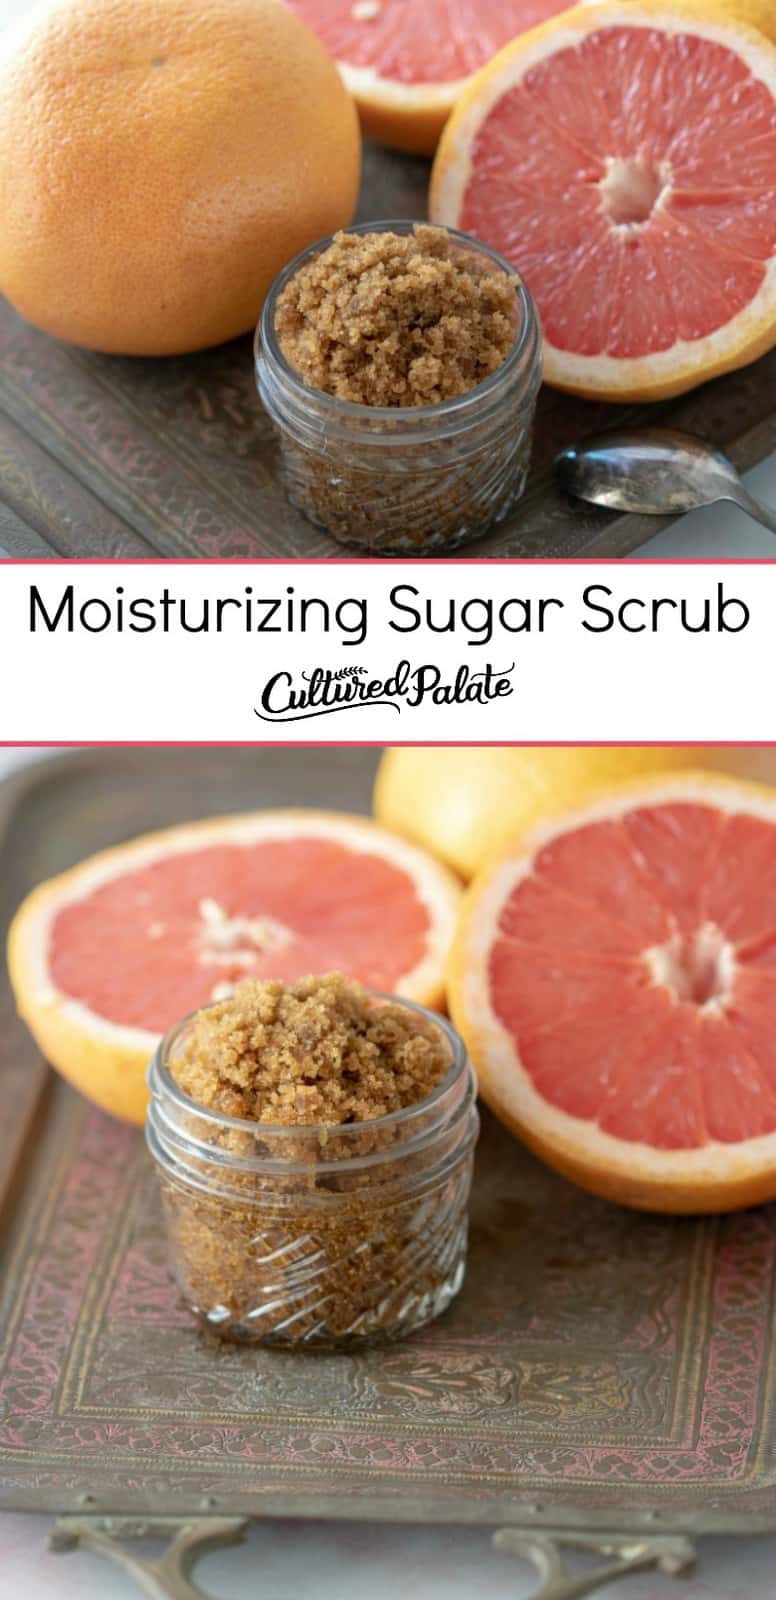 Moisturizing Sugar Scrub shown in two images (close up and from the side) both in glass jar with grapefruit around on tile with text overlay.